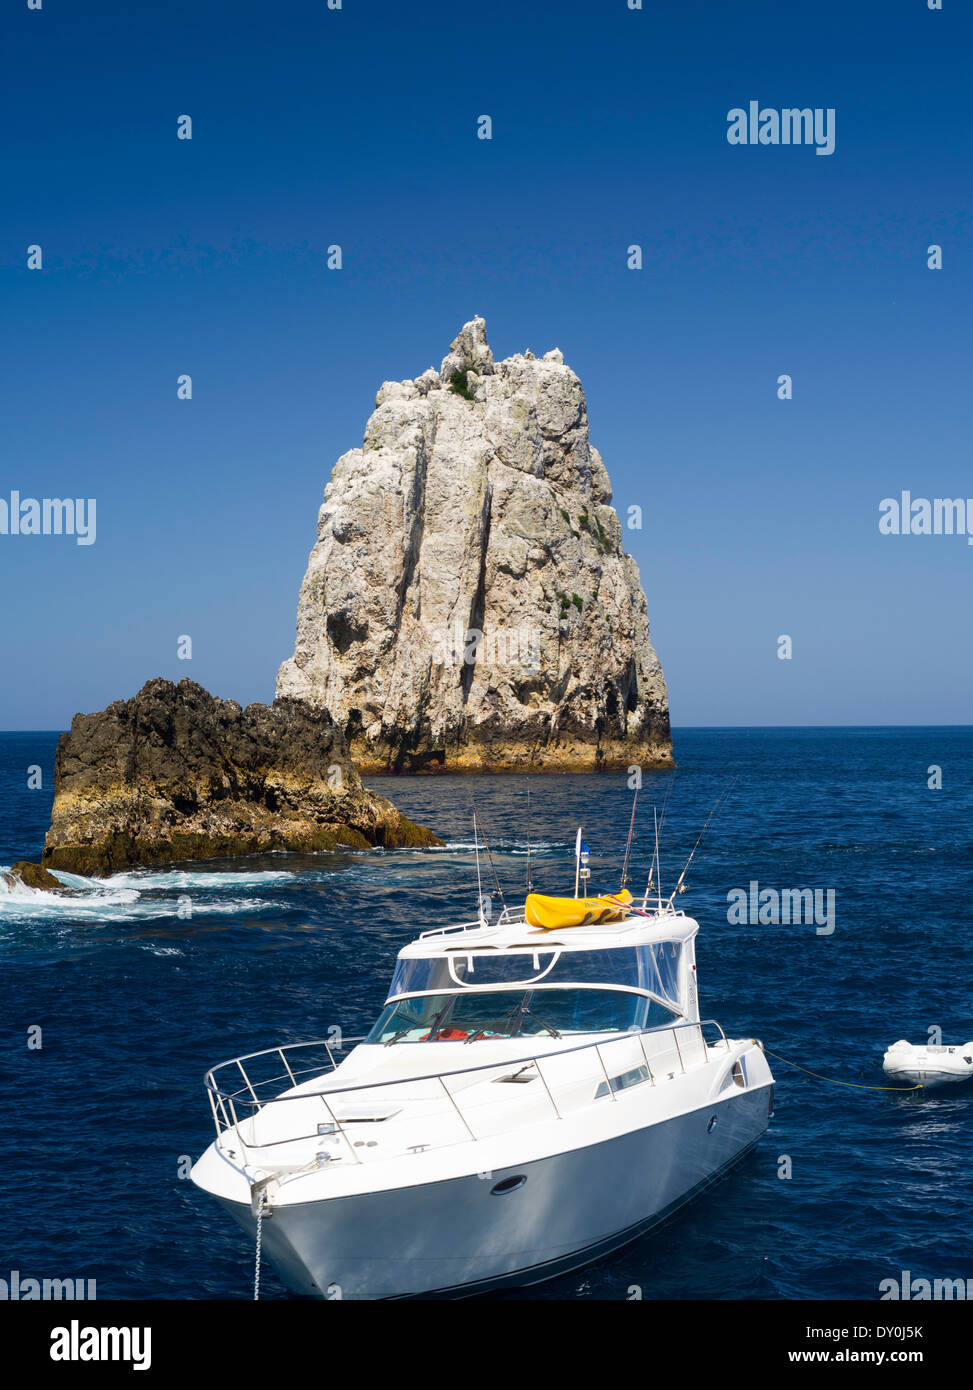 High Peak Rocks with a boat in the foreground. View of Poor Knights Islands, summer, Northland, New Zealand Stock Photo